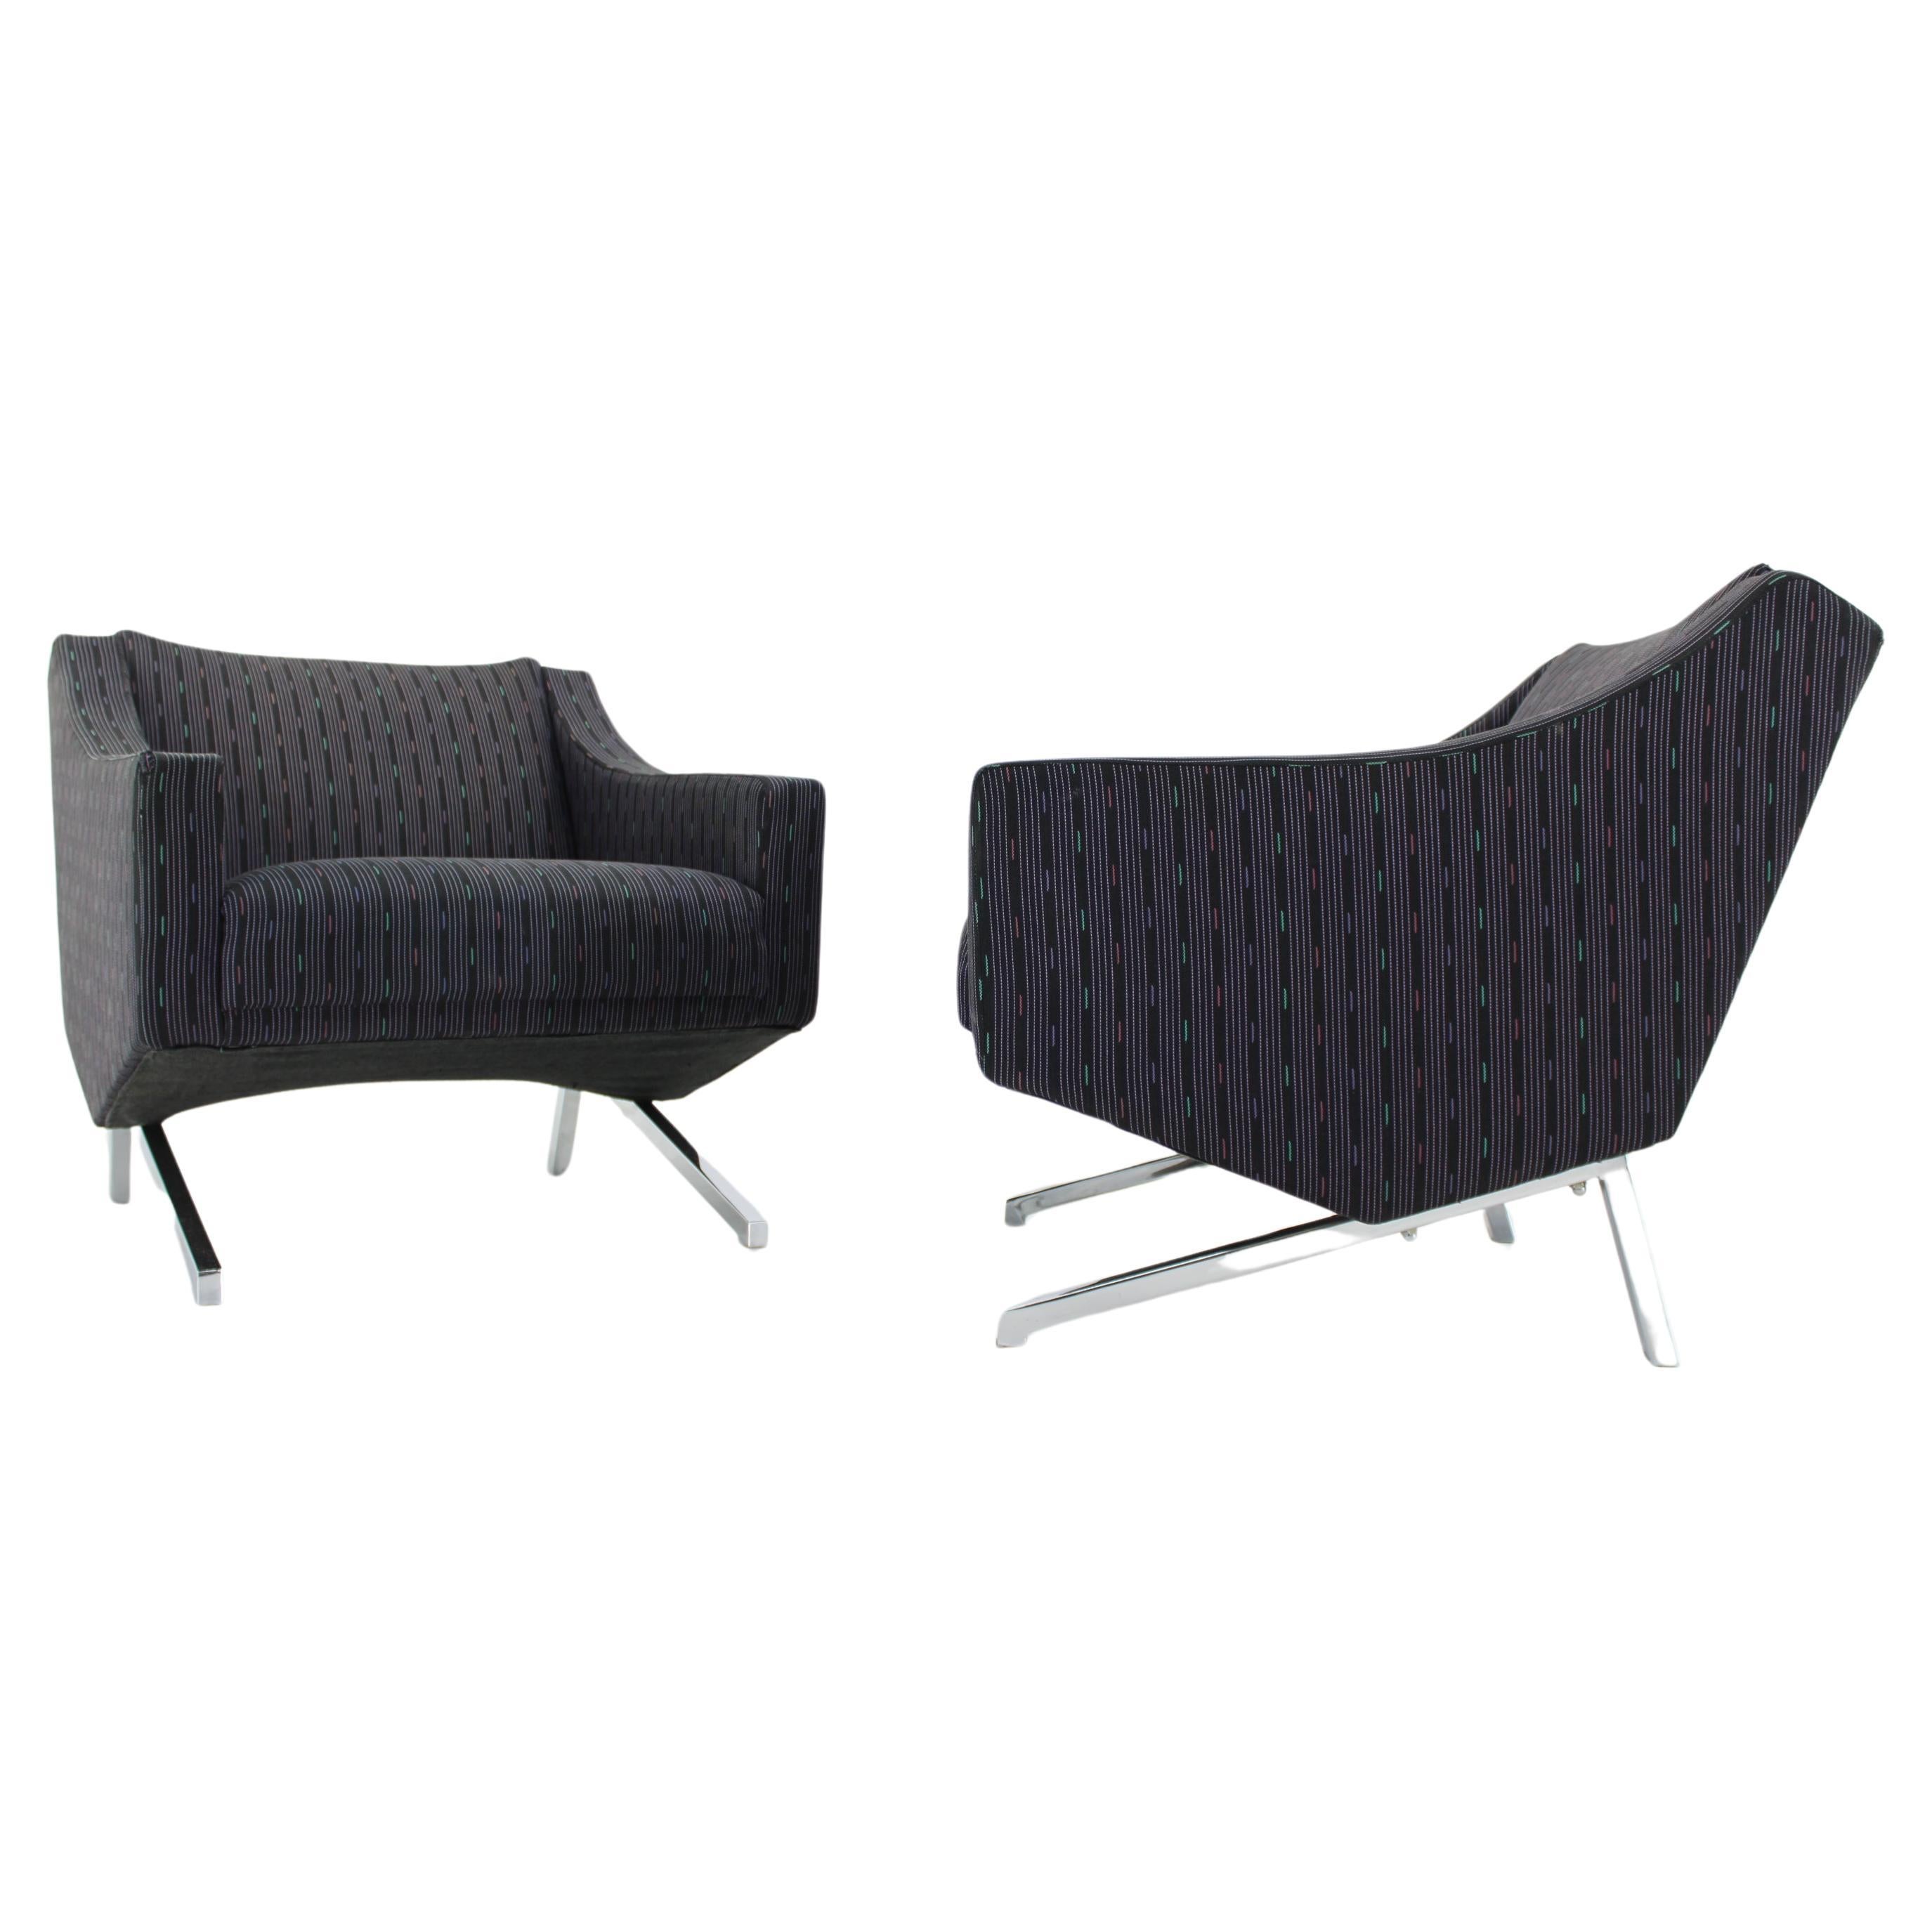 1970s Pair of Italian Design Armchairs For Sale